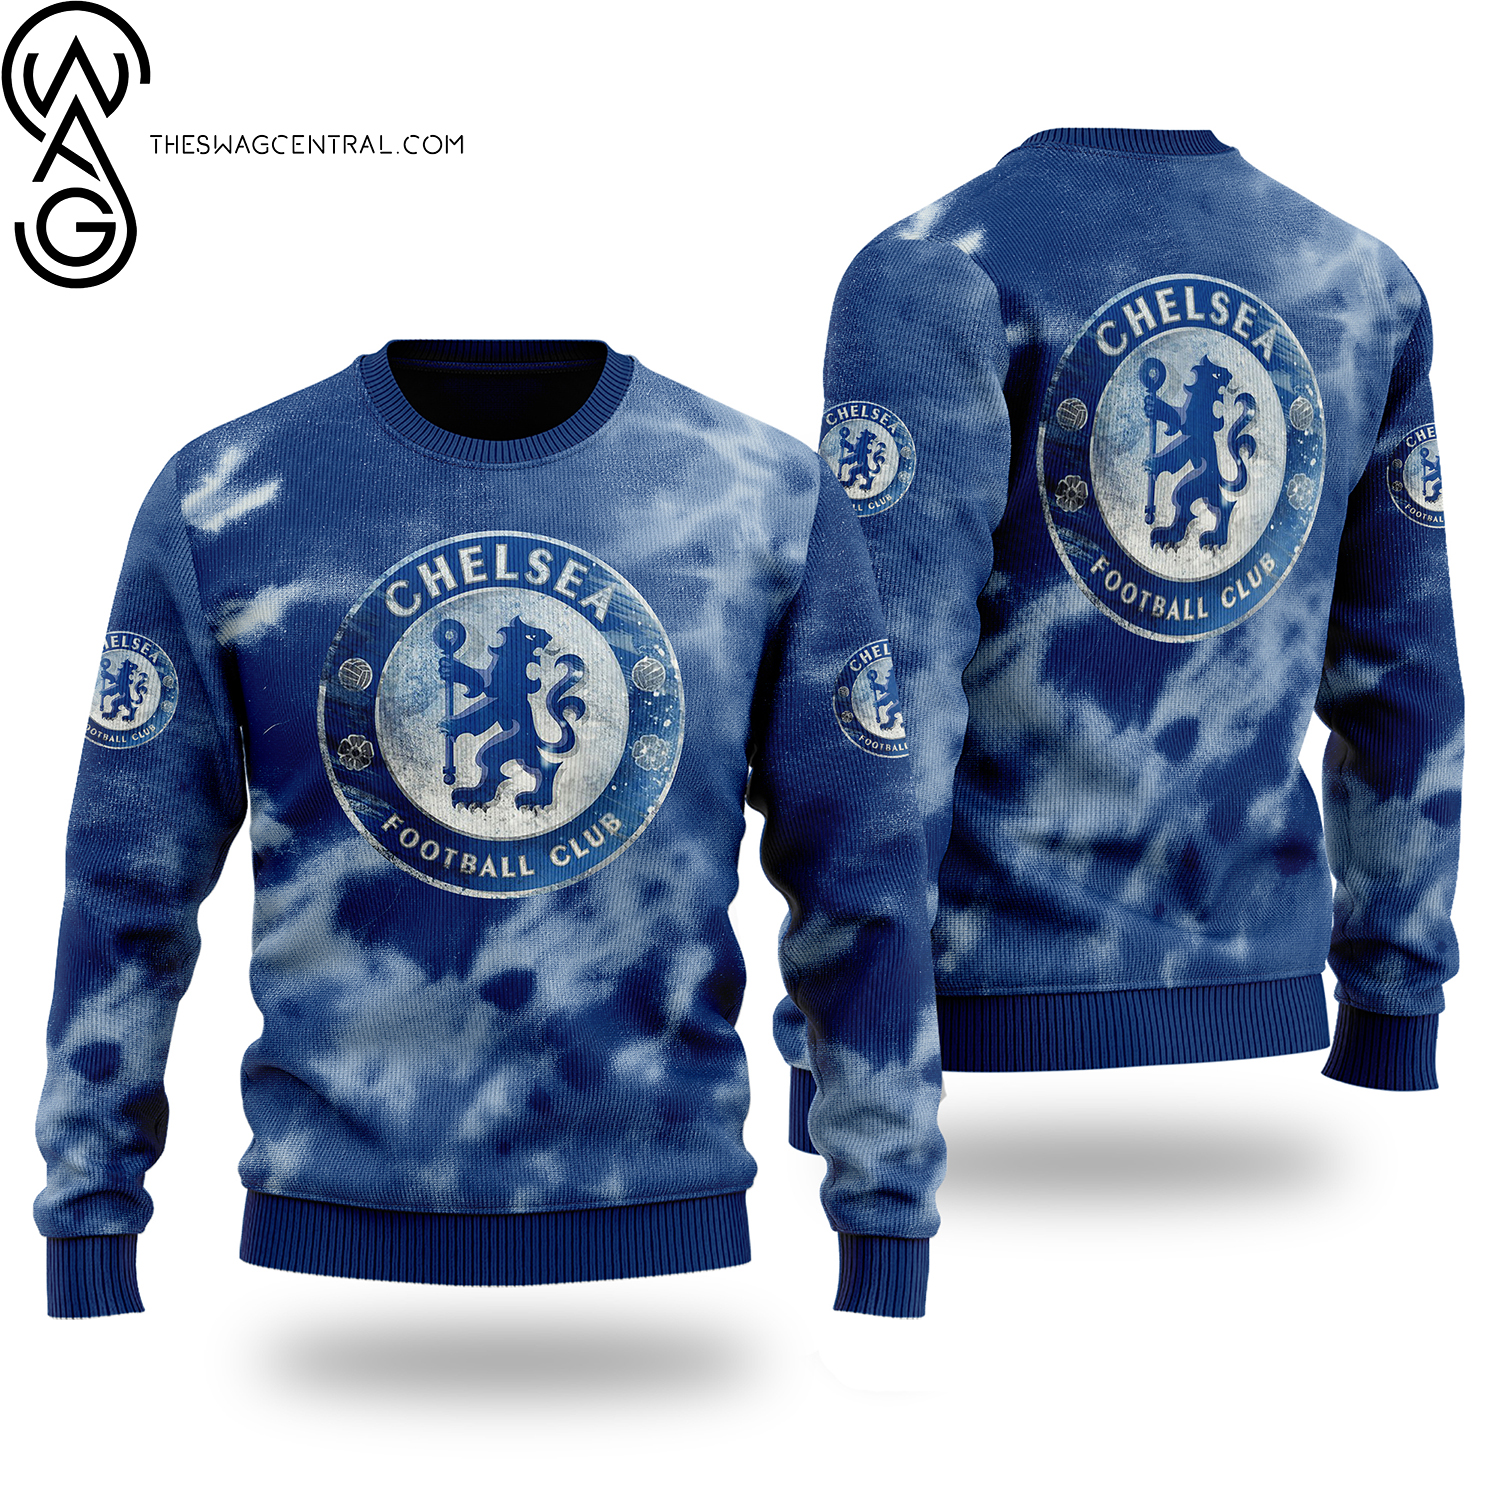 Chelsea F.C. Full Printed Ugly Christmas Holiday Sweater